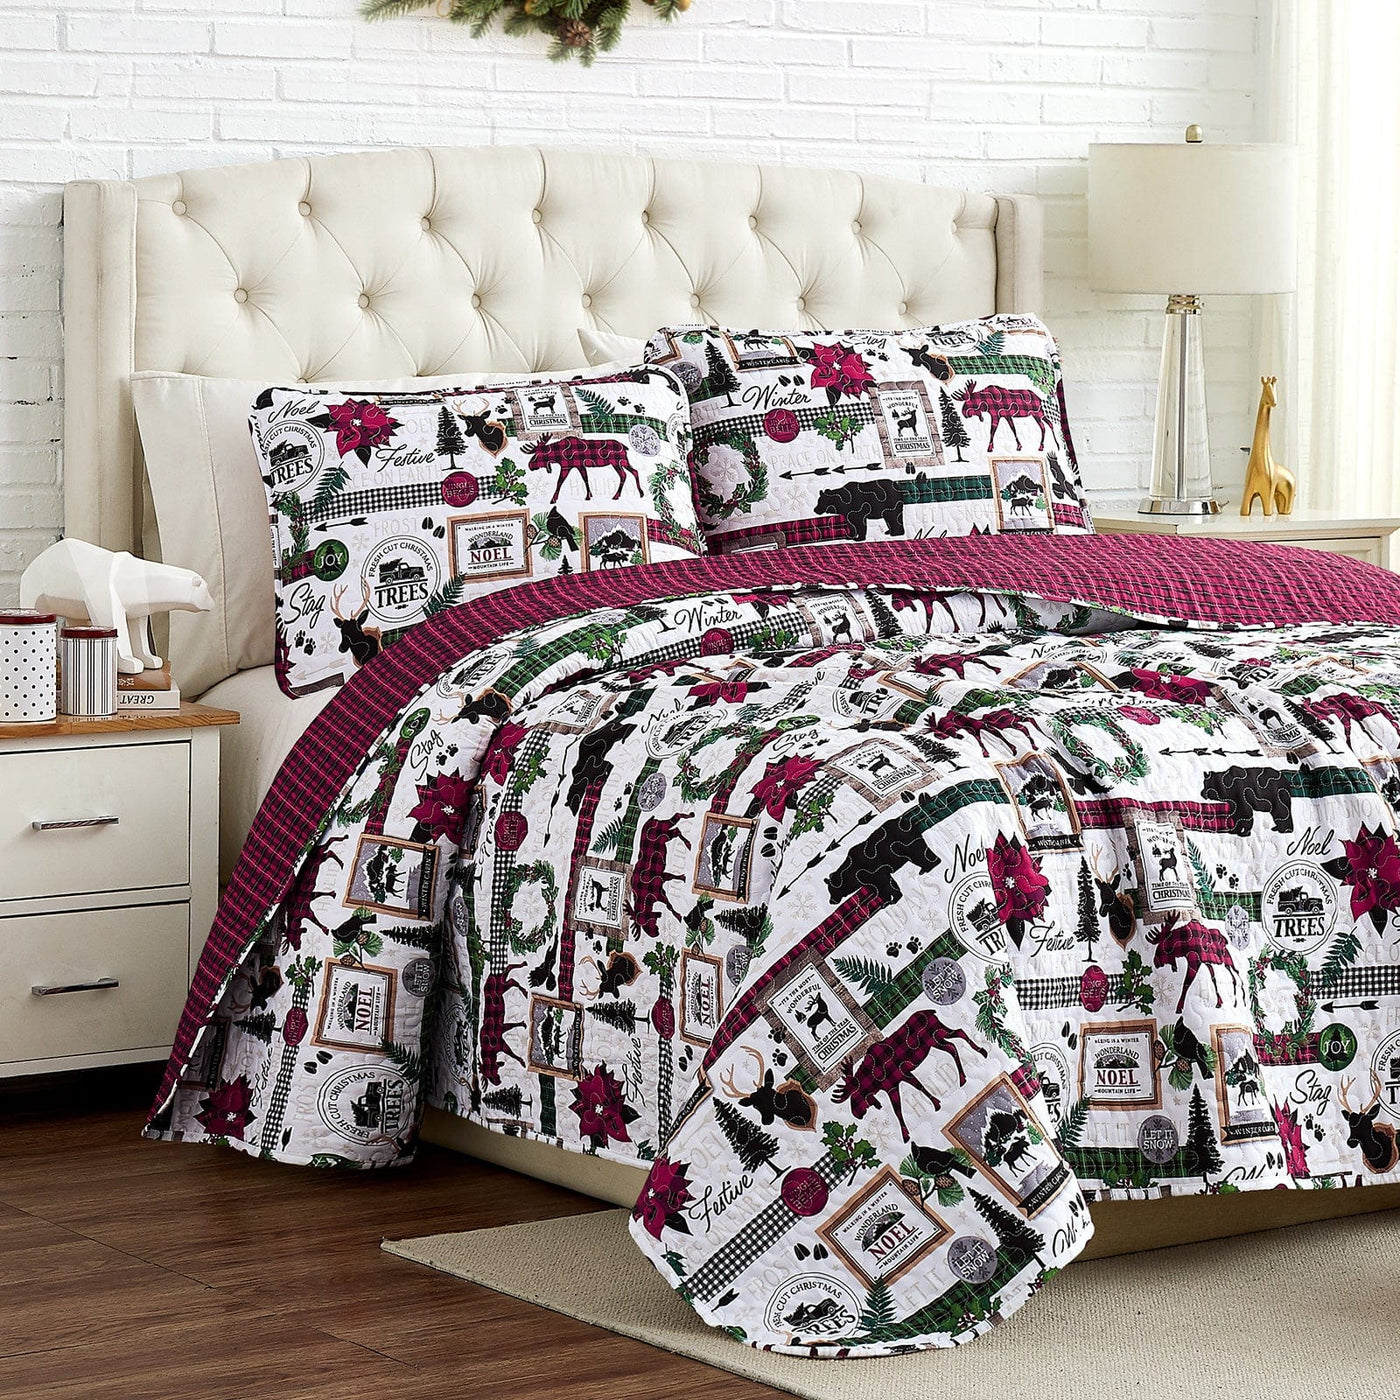 Merry Town Oversized Quilt Set